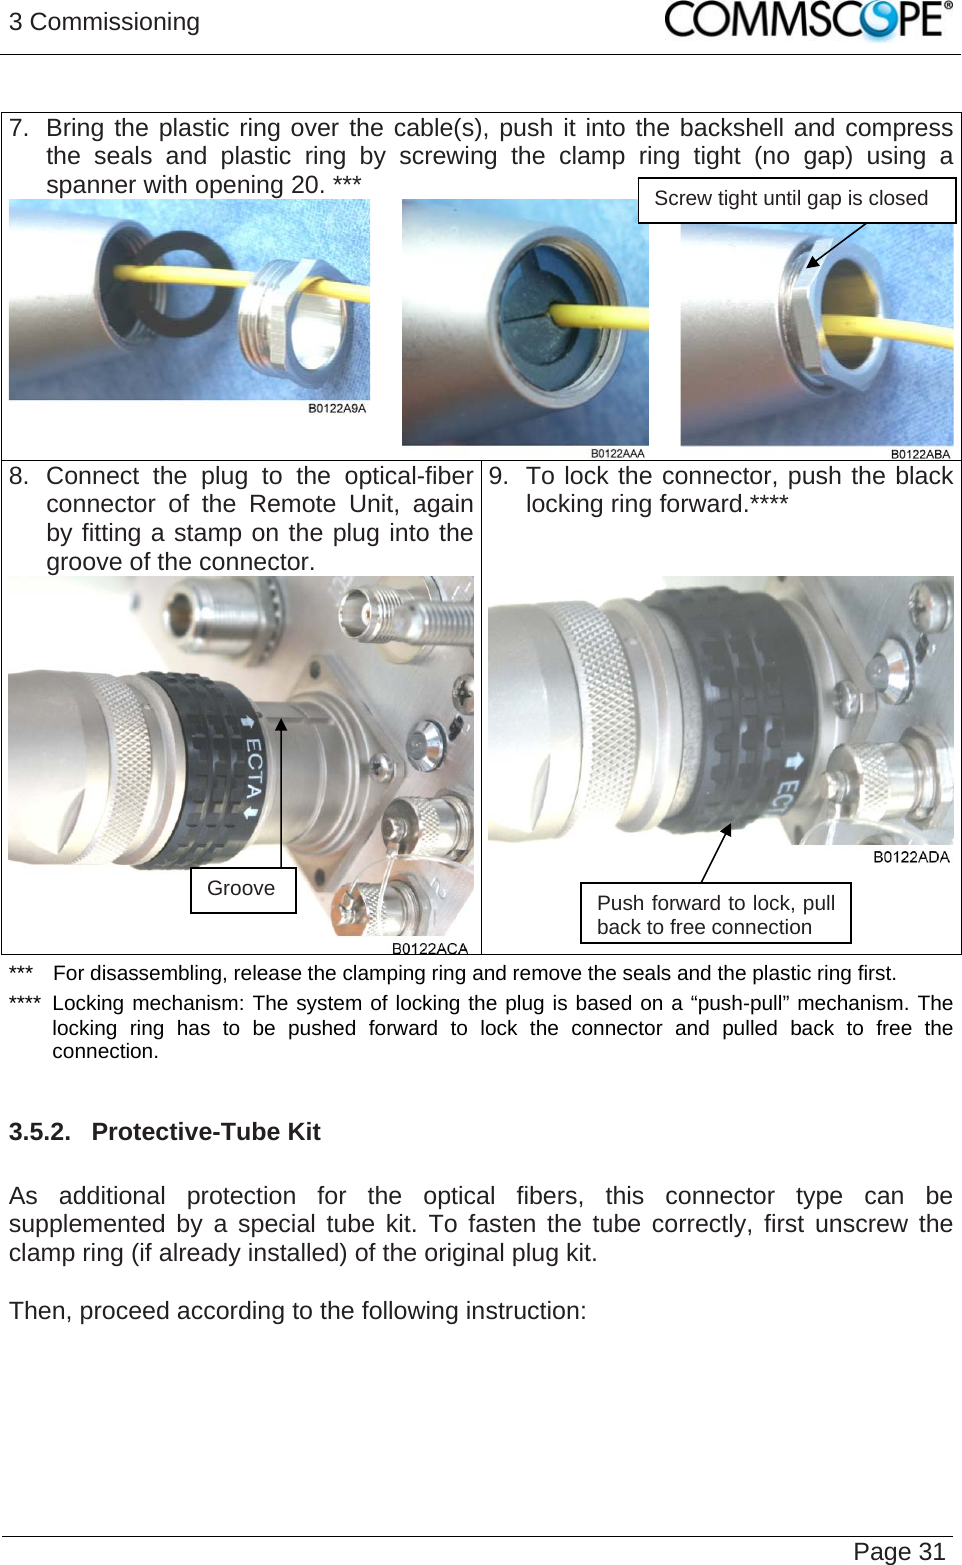 3 Commissioning   Page 31 7.  Bring the plastic ring over the cable(s), push it into the backshell and compress the seals and plastic ring by screwing the clamp ring tight (no gap) using a spanner with opening 20. ***   8. Connect the plug to the optical-fiberconnector of the Remote Unit, again by fitting a stamp on the plug into the groove of the connector.  9.  To lock the connector, push the black locking ring forward.****  Screw tight until gap is closed  ***  For disassembling, release the clamping ring and remove the seals and the plastic ring first. ****  Locking mechanism: The system of locking the plug is based on a “push-pull” mechanism. The locking ring has to be pushed forward to lock the connector and pulled back to free the connection.  3.5.2.  Protective-Tube Kit  As additional protection for the optical fibers, this connector type can be supplemented by a special tube kit. To fasten the tube correctly, first unscrew the clamp ring (if already installed) of the original plug kit.   Then, proceed according to the following instruction:  Groove  Push forward to lock, pull back to free connection 